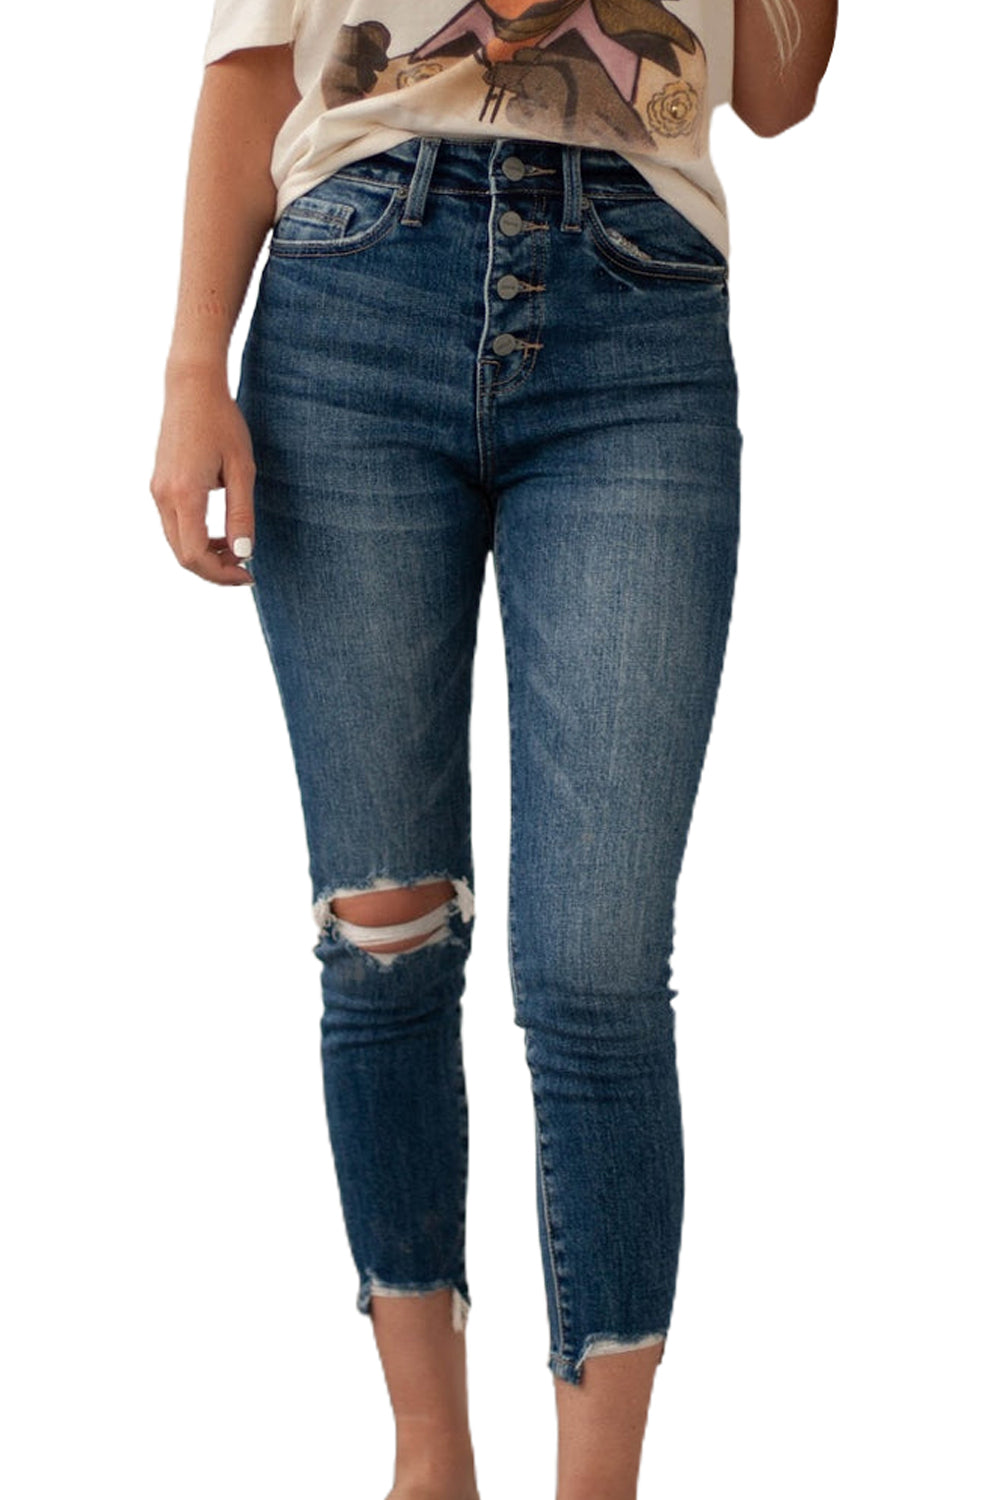 Blue Button Fly High Waist Ripped Skinny Fit Ankle Jeans Jeans JT's Designer Fashion